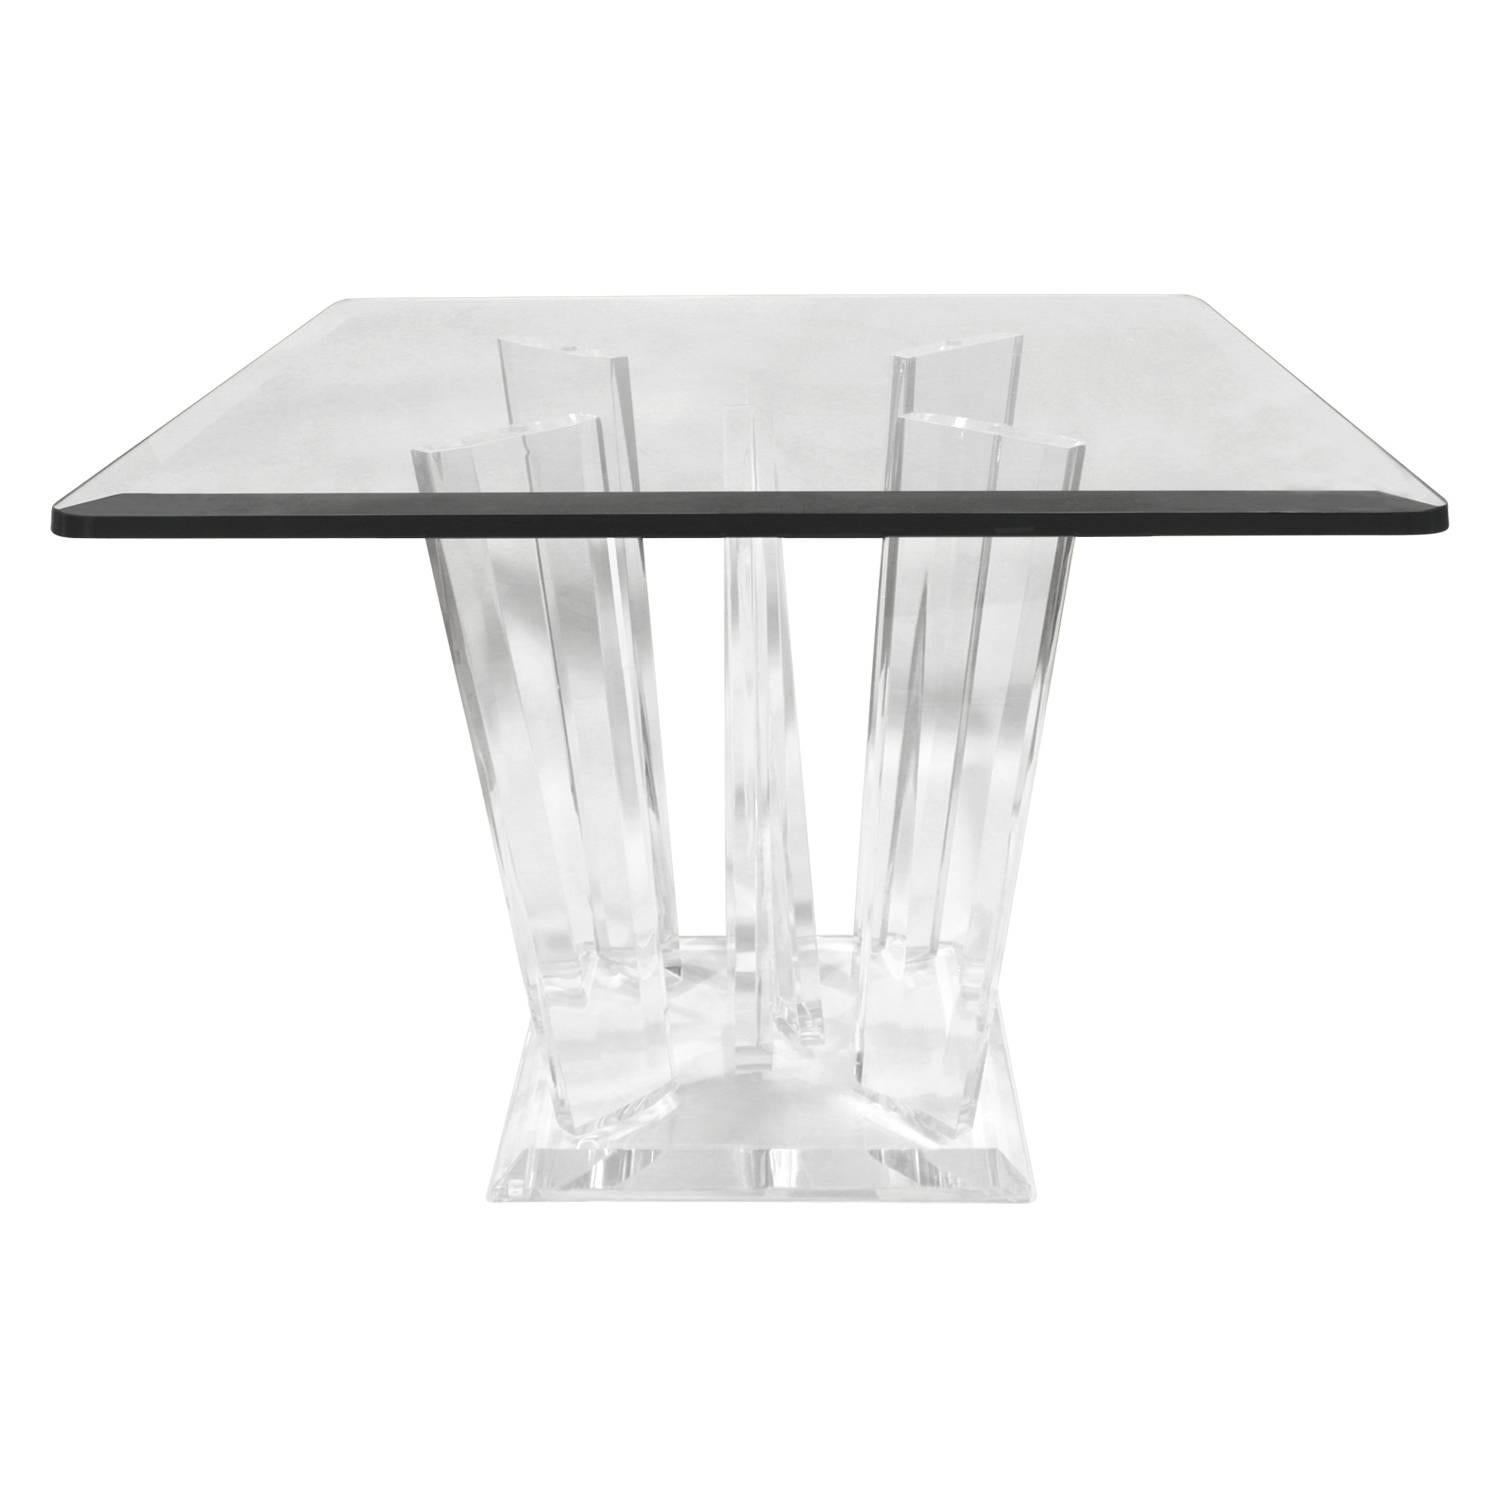 Side table with sculptural Lucite base with thick glass top, American, 1970s.